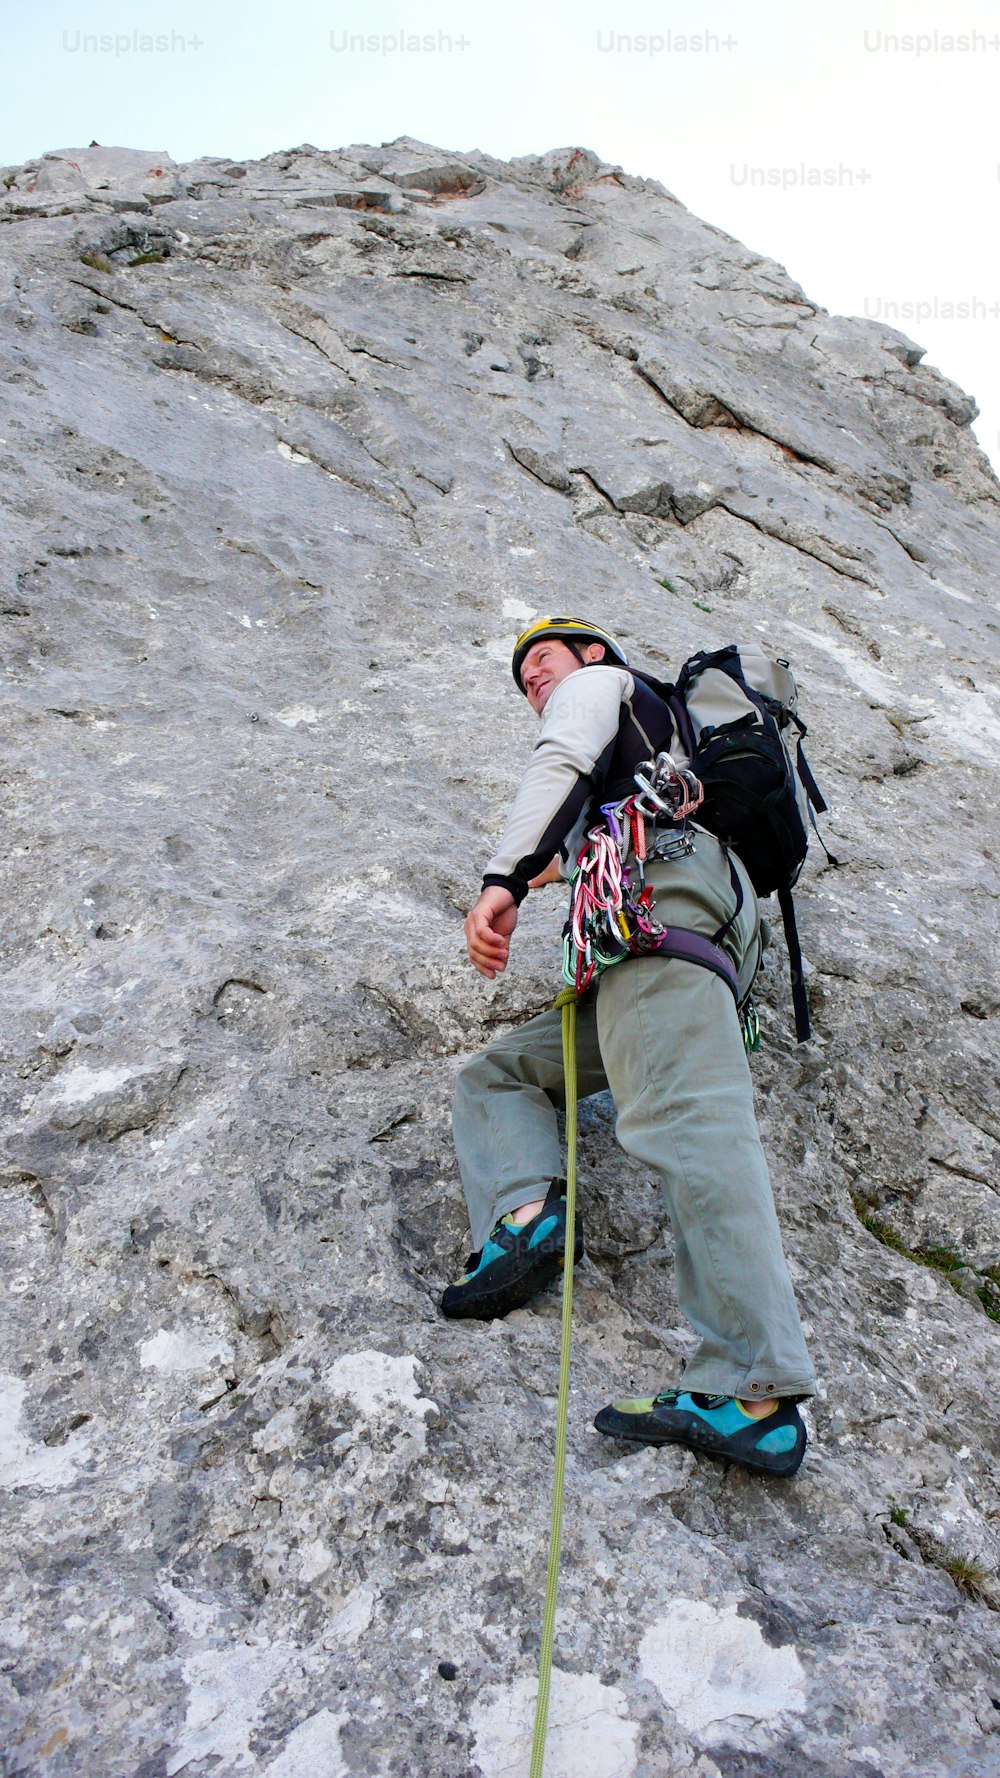 A mountain guide at the start of a steep climbing route in the Swiss Alps